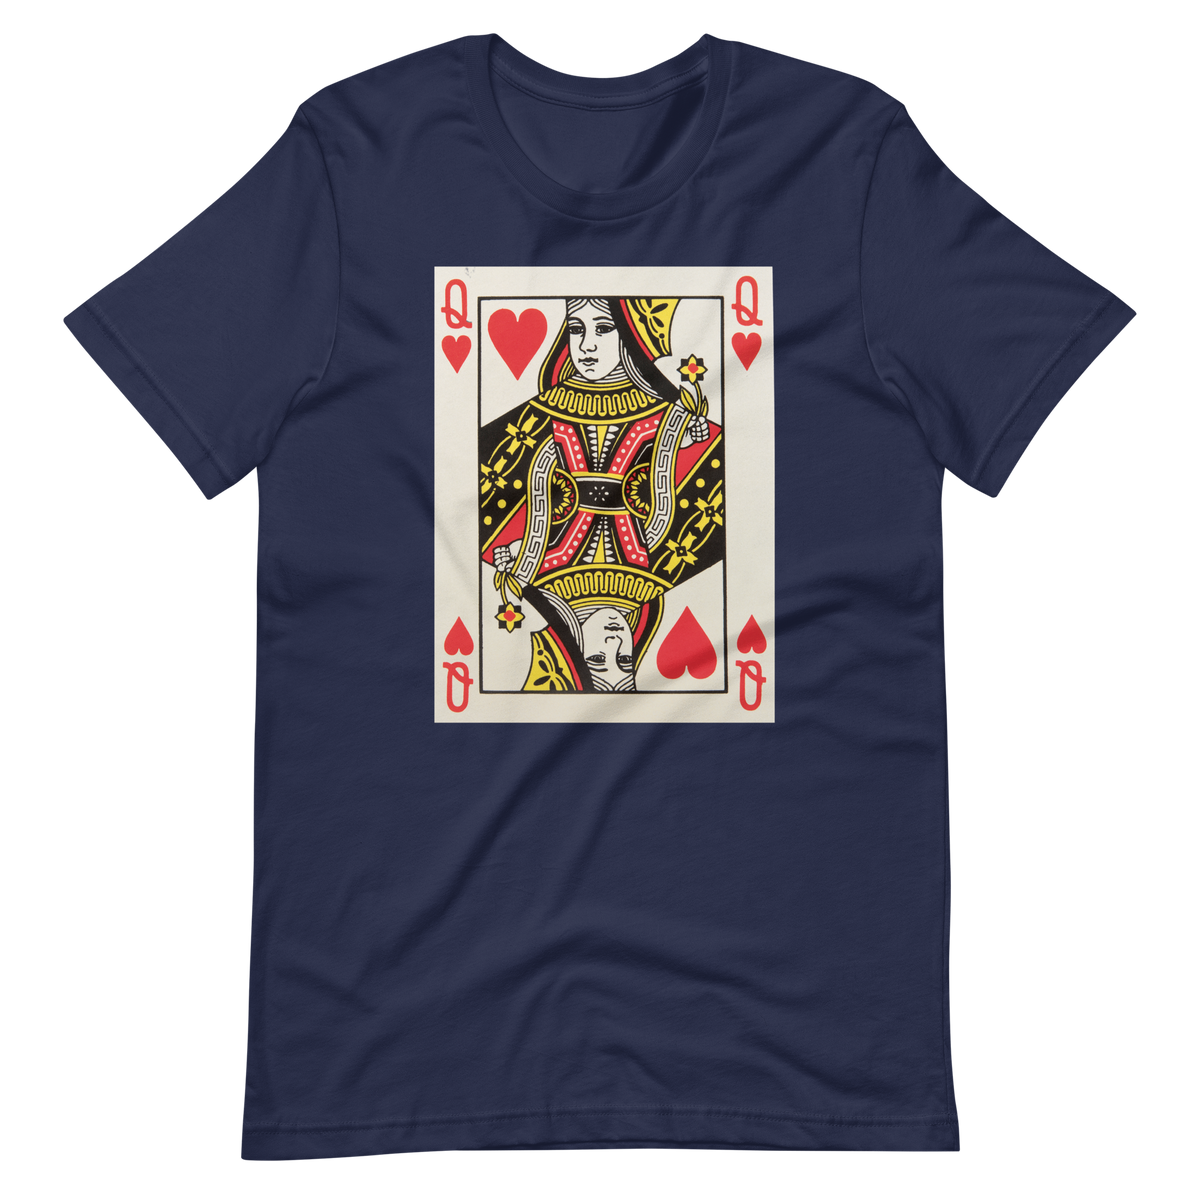 Valentines day T-Shirt  Retro Vintage Valentine  Red Queen Playing Card  Queen of Hearts Valentine Shirt  queen of hearts tshirt  Queen of Hearts Feminist  Mothers Day Shirt Gift for Mom  girl boss apparel  gift for wife  gift for girlfriend  feminist tee  empower women shirt